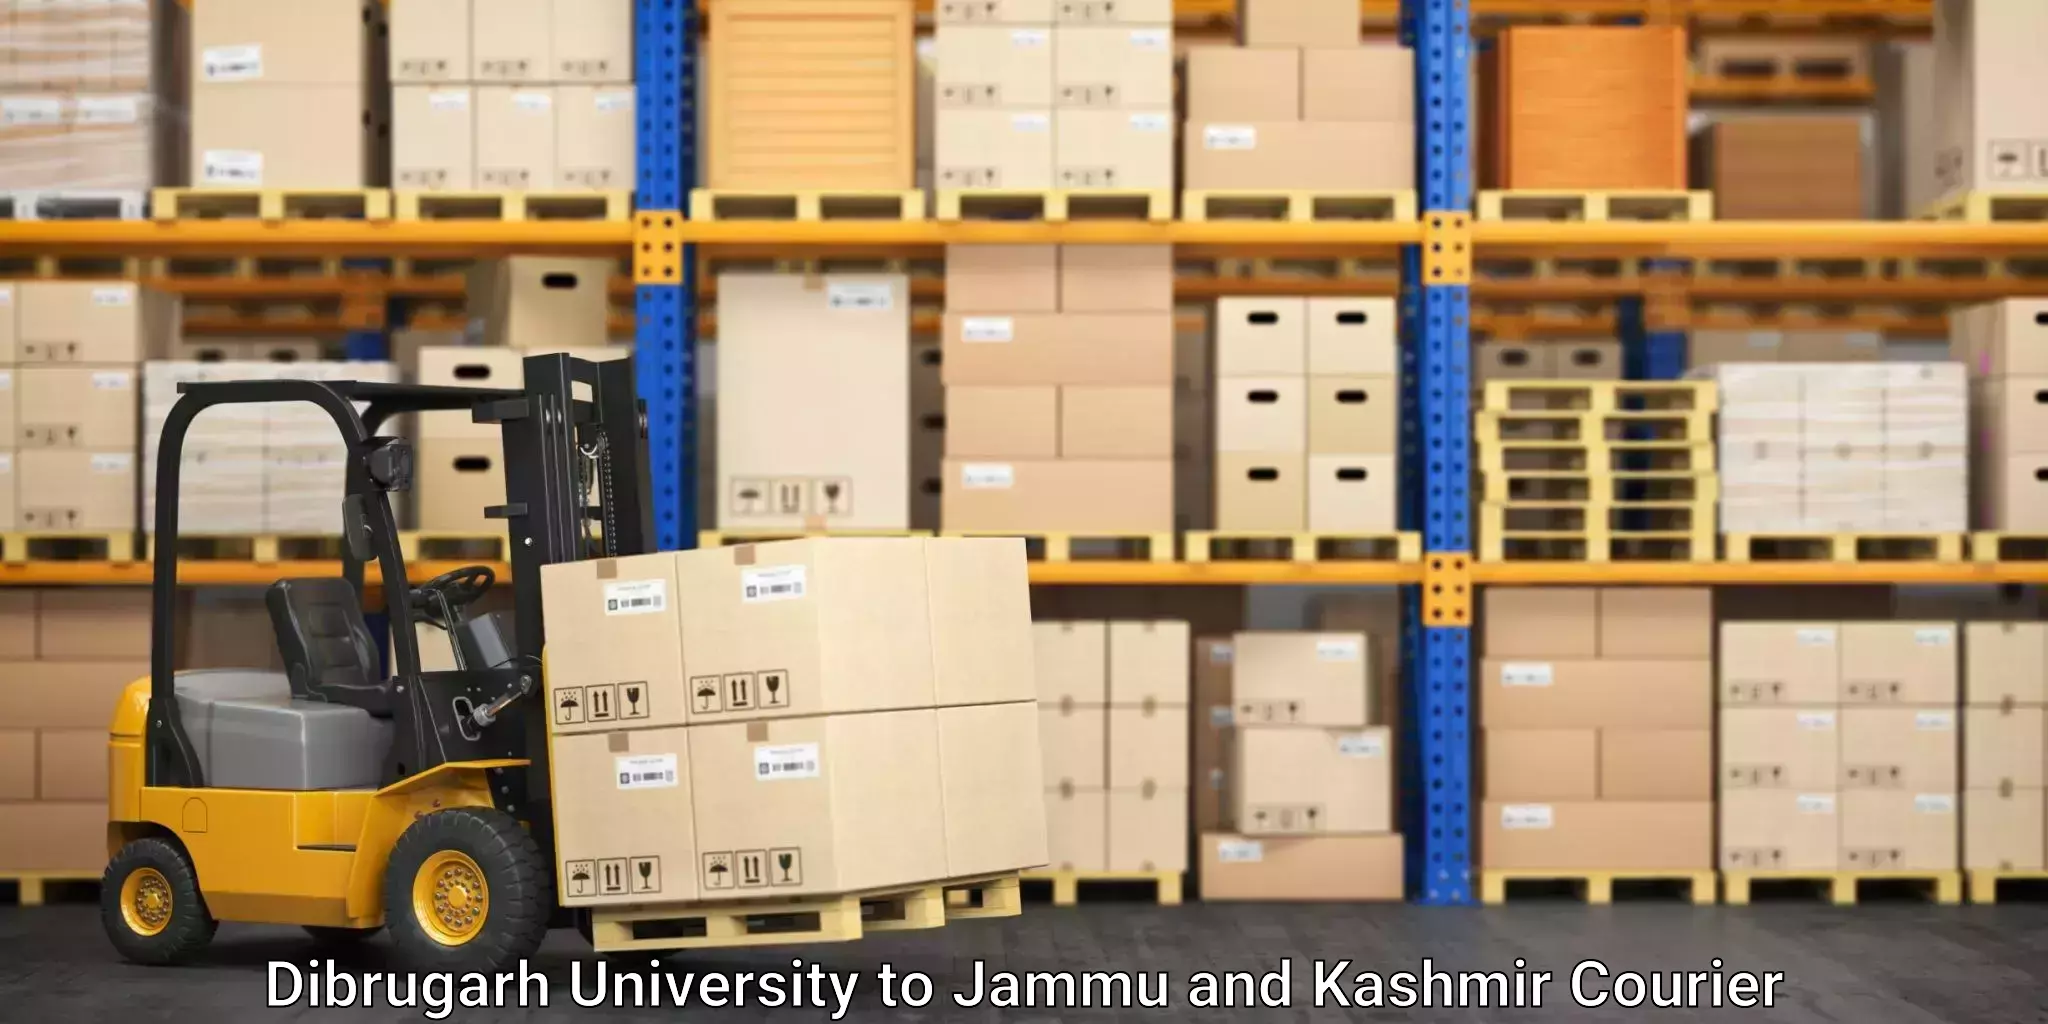 Round-the-clock parcel delivery Dibrugarh University to Pulwama